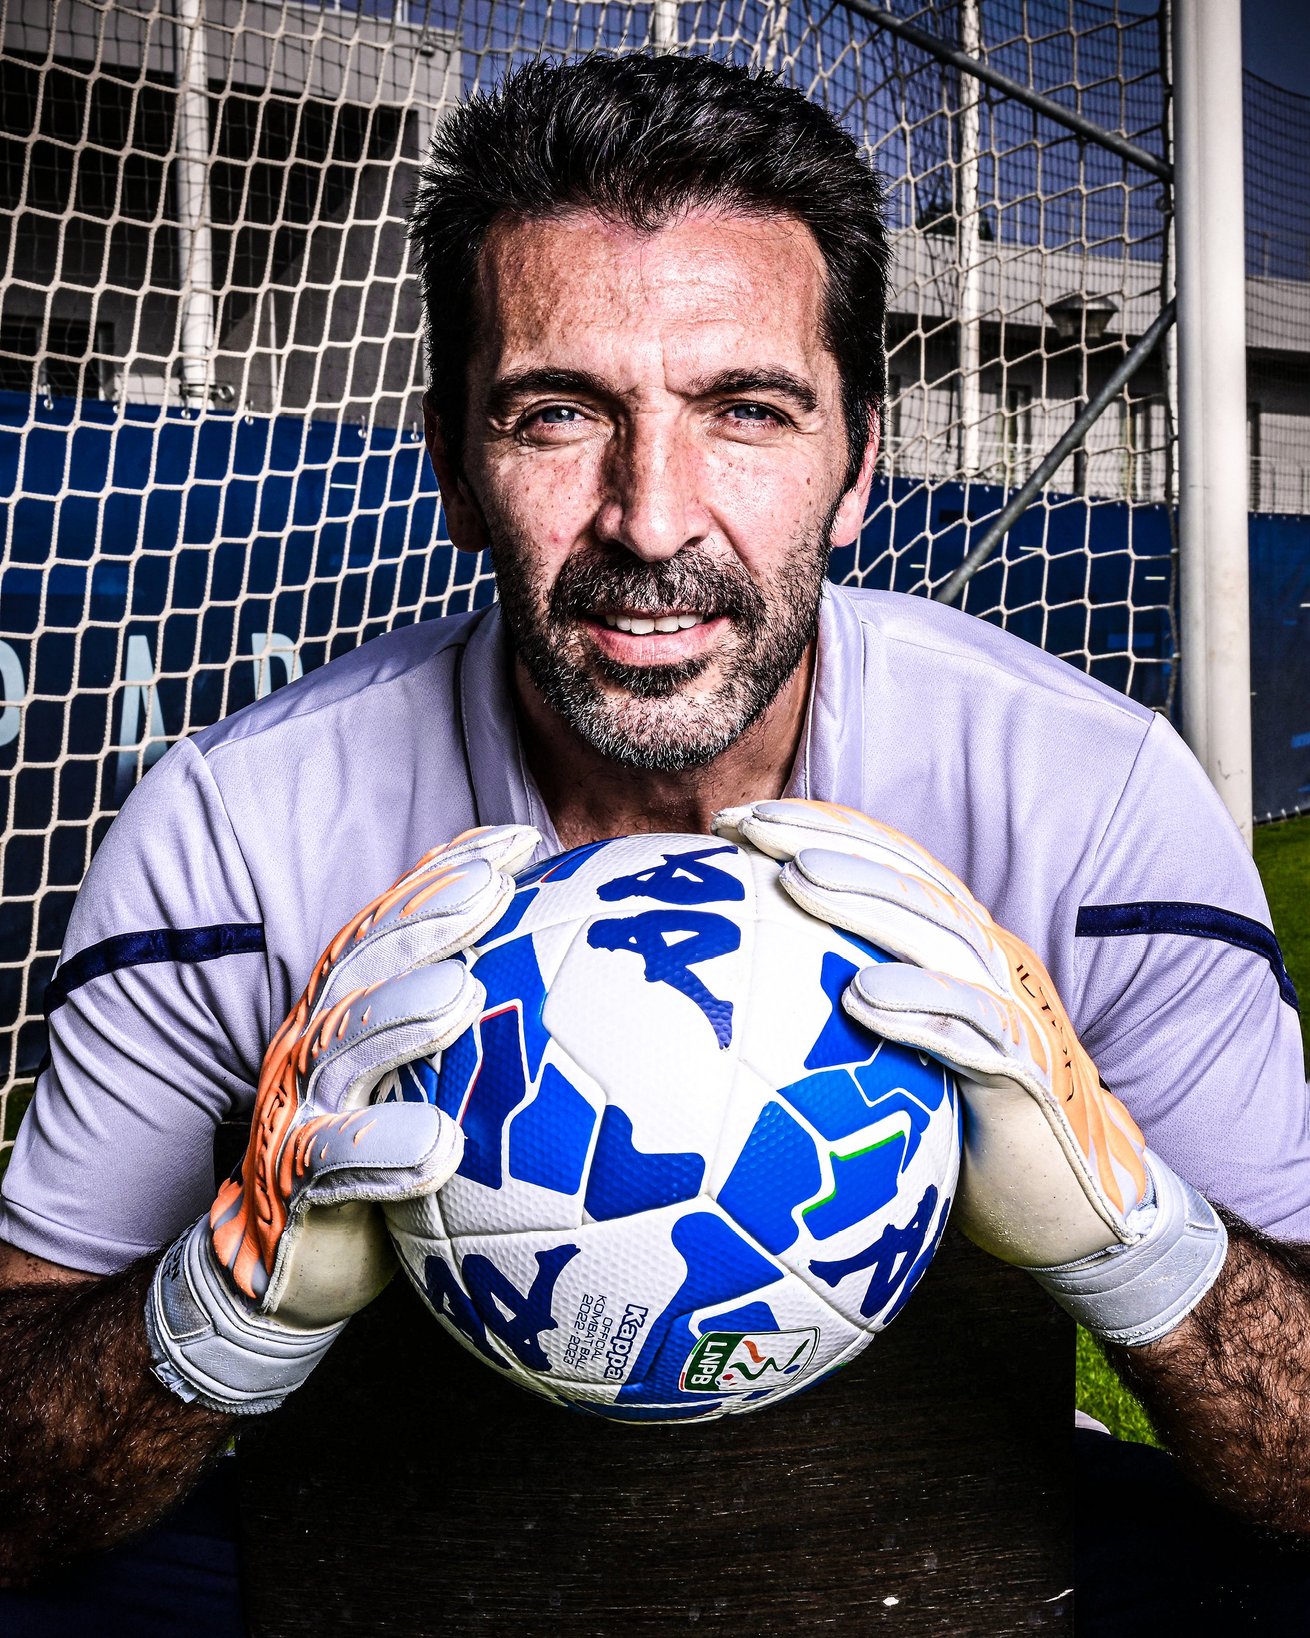  Happy birthday to Gianluigi Buffon, who turns 45 today! 

Simply one of the greatest keepers of all time 